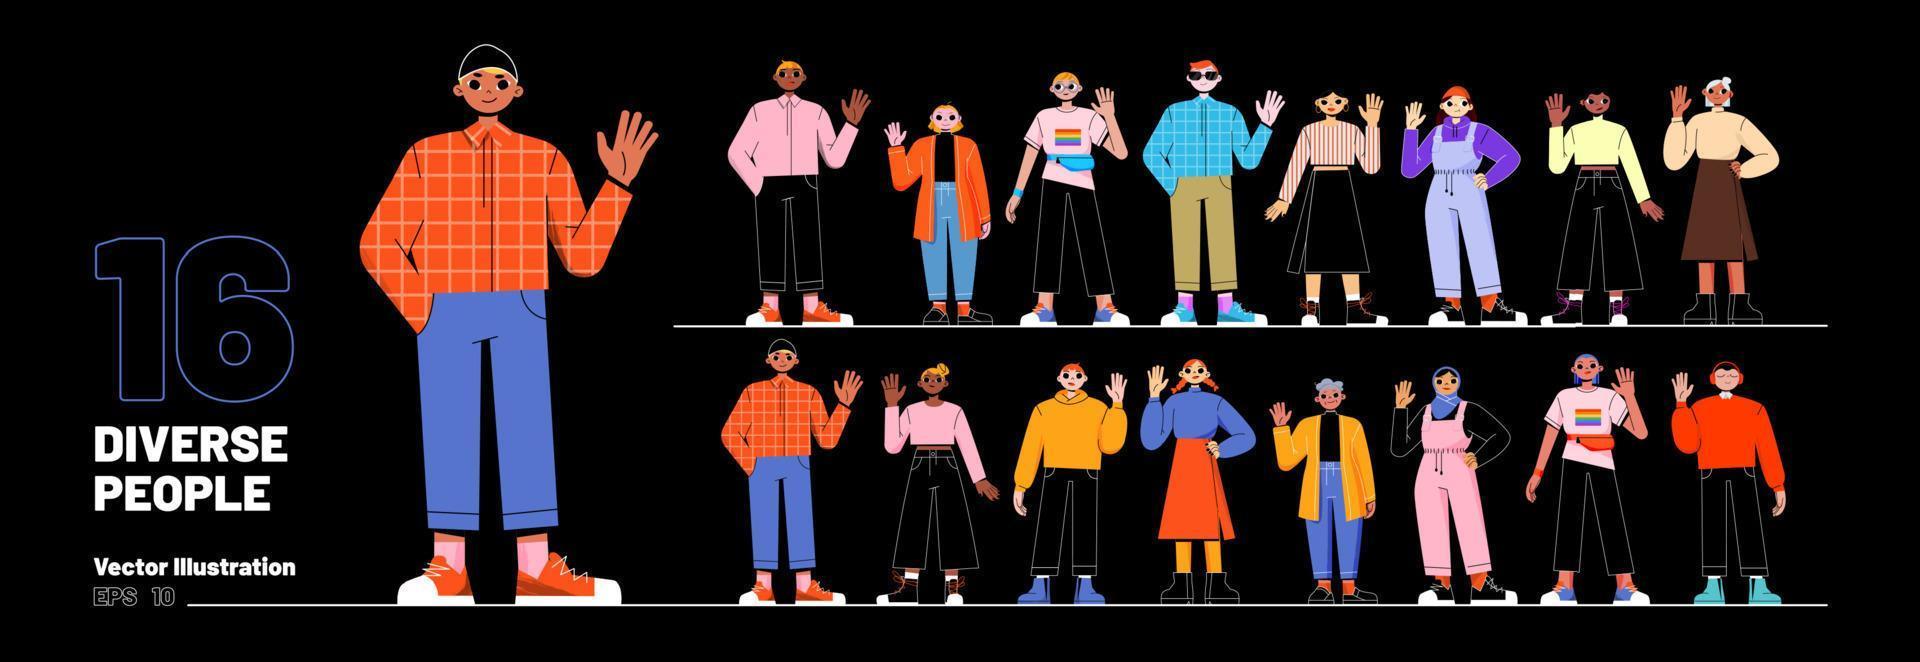 Big set of 16 diverse people isolated on black vector